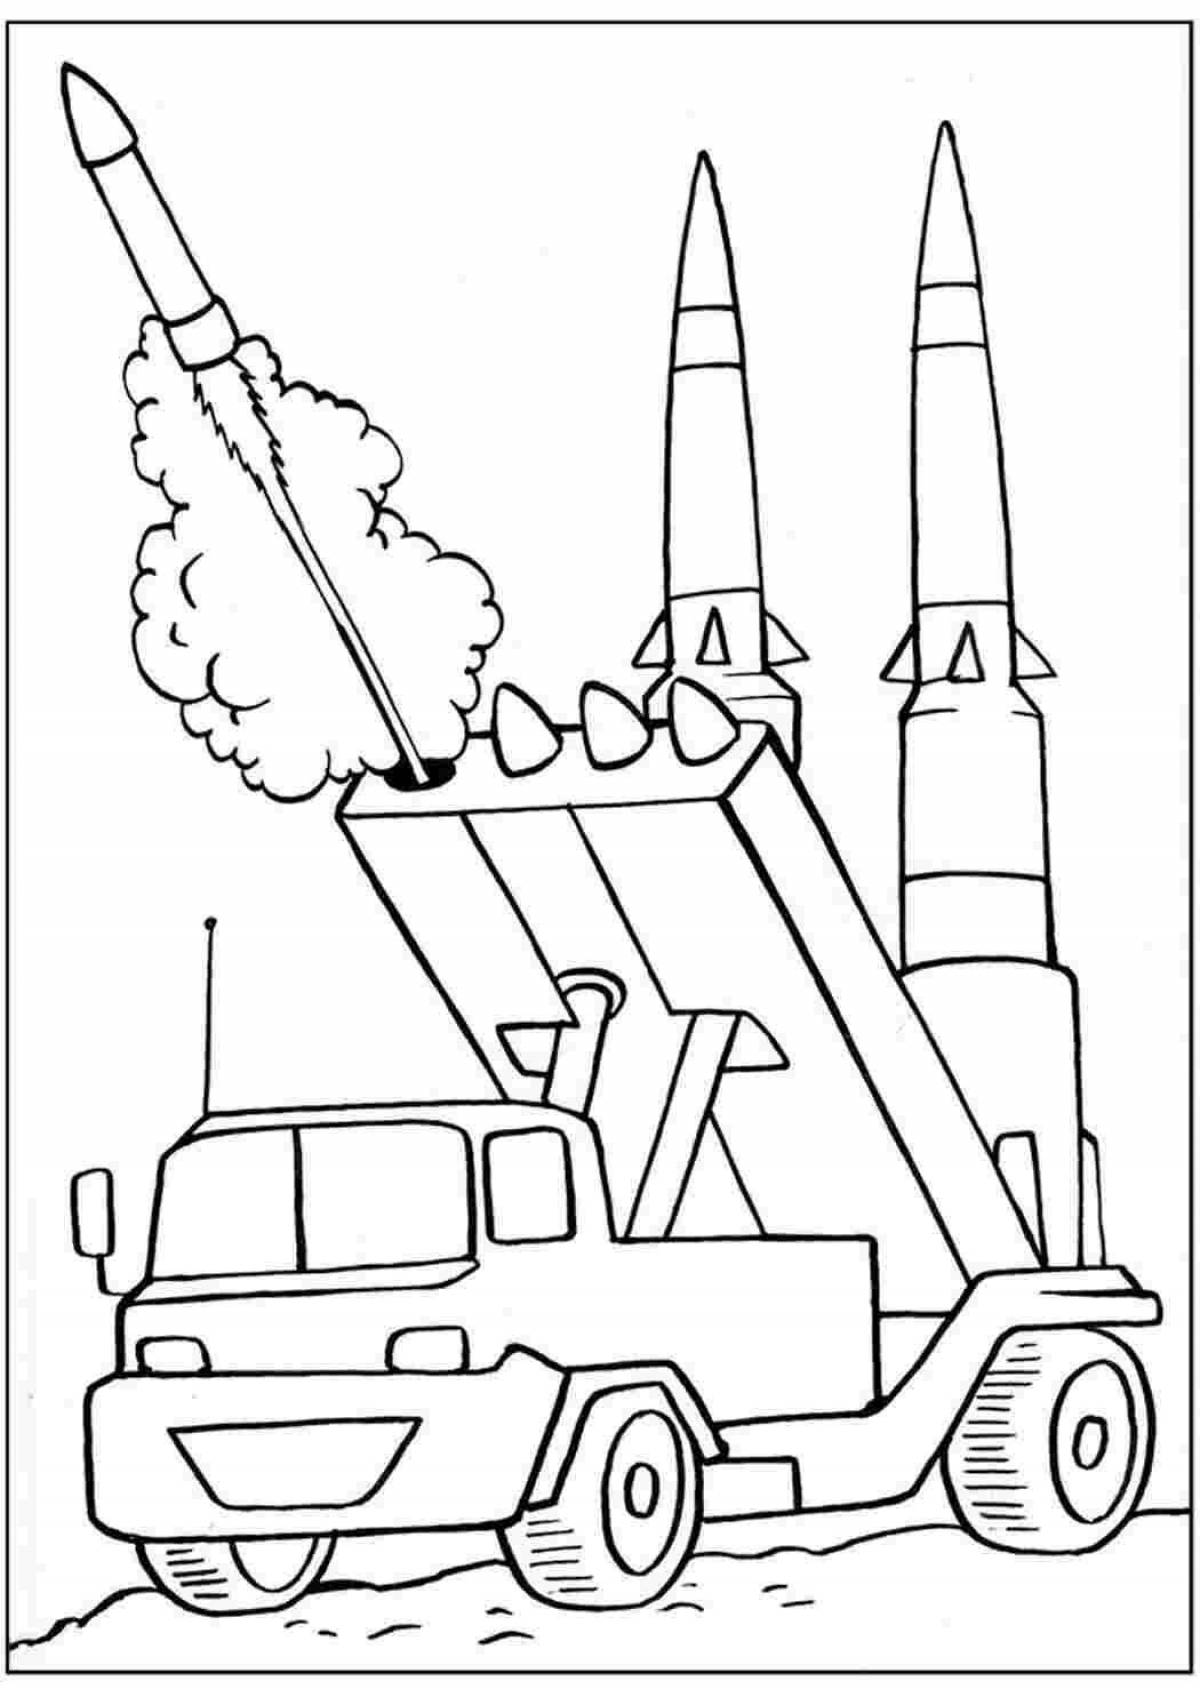 Impressive military vehicle coloring page